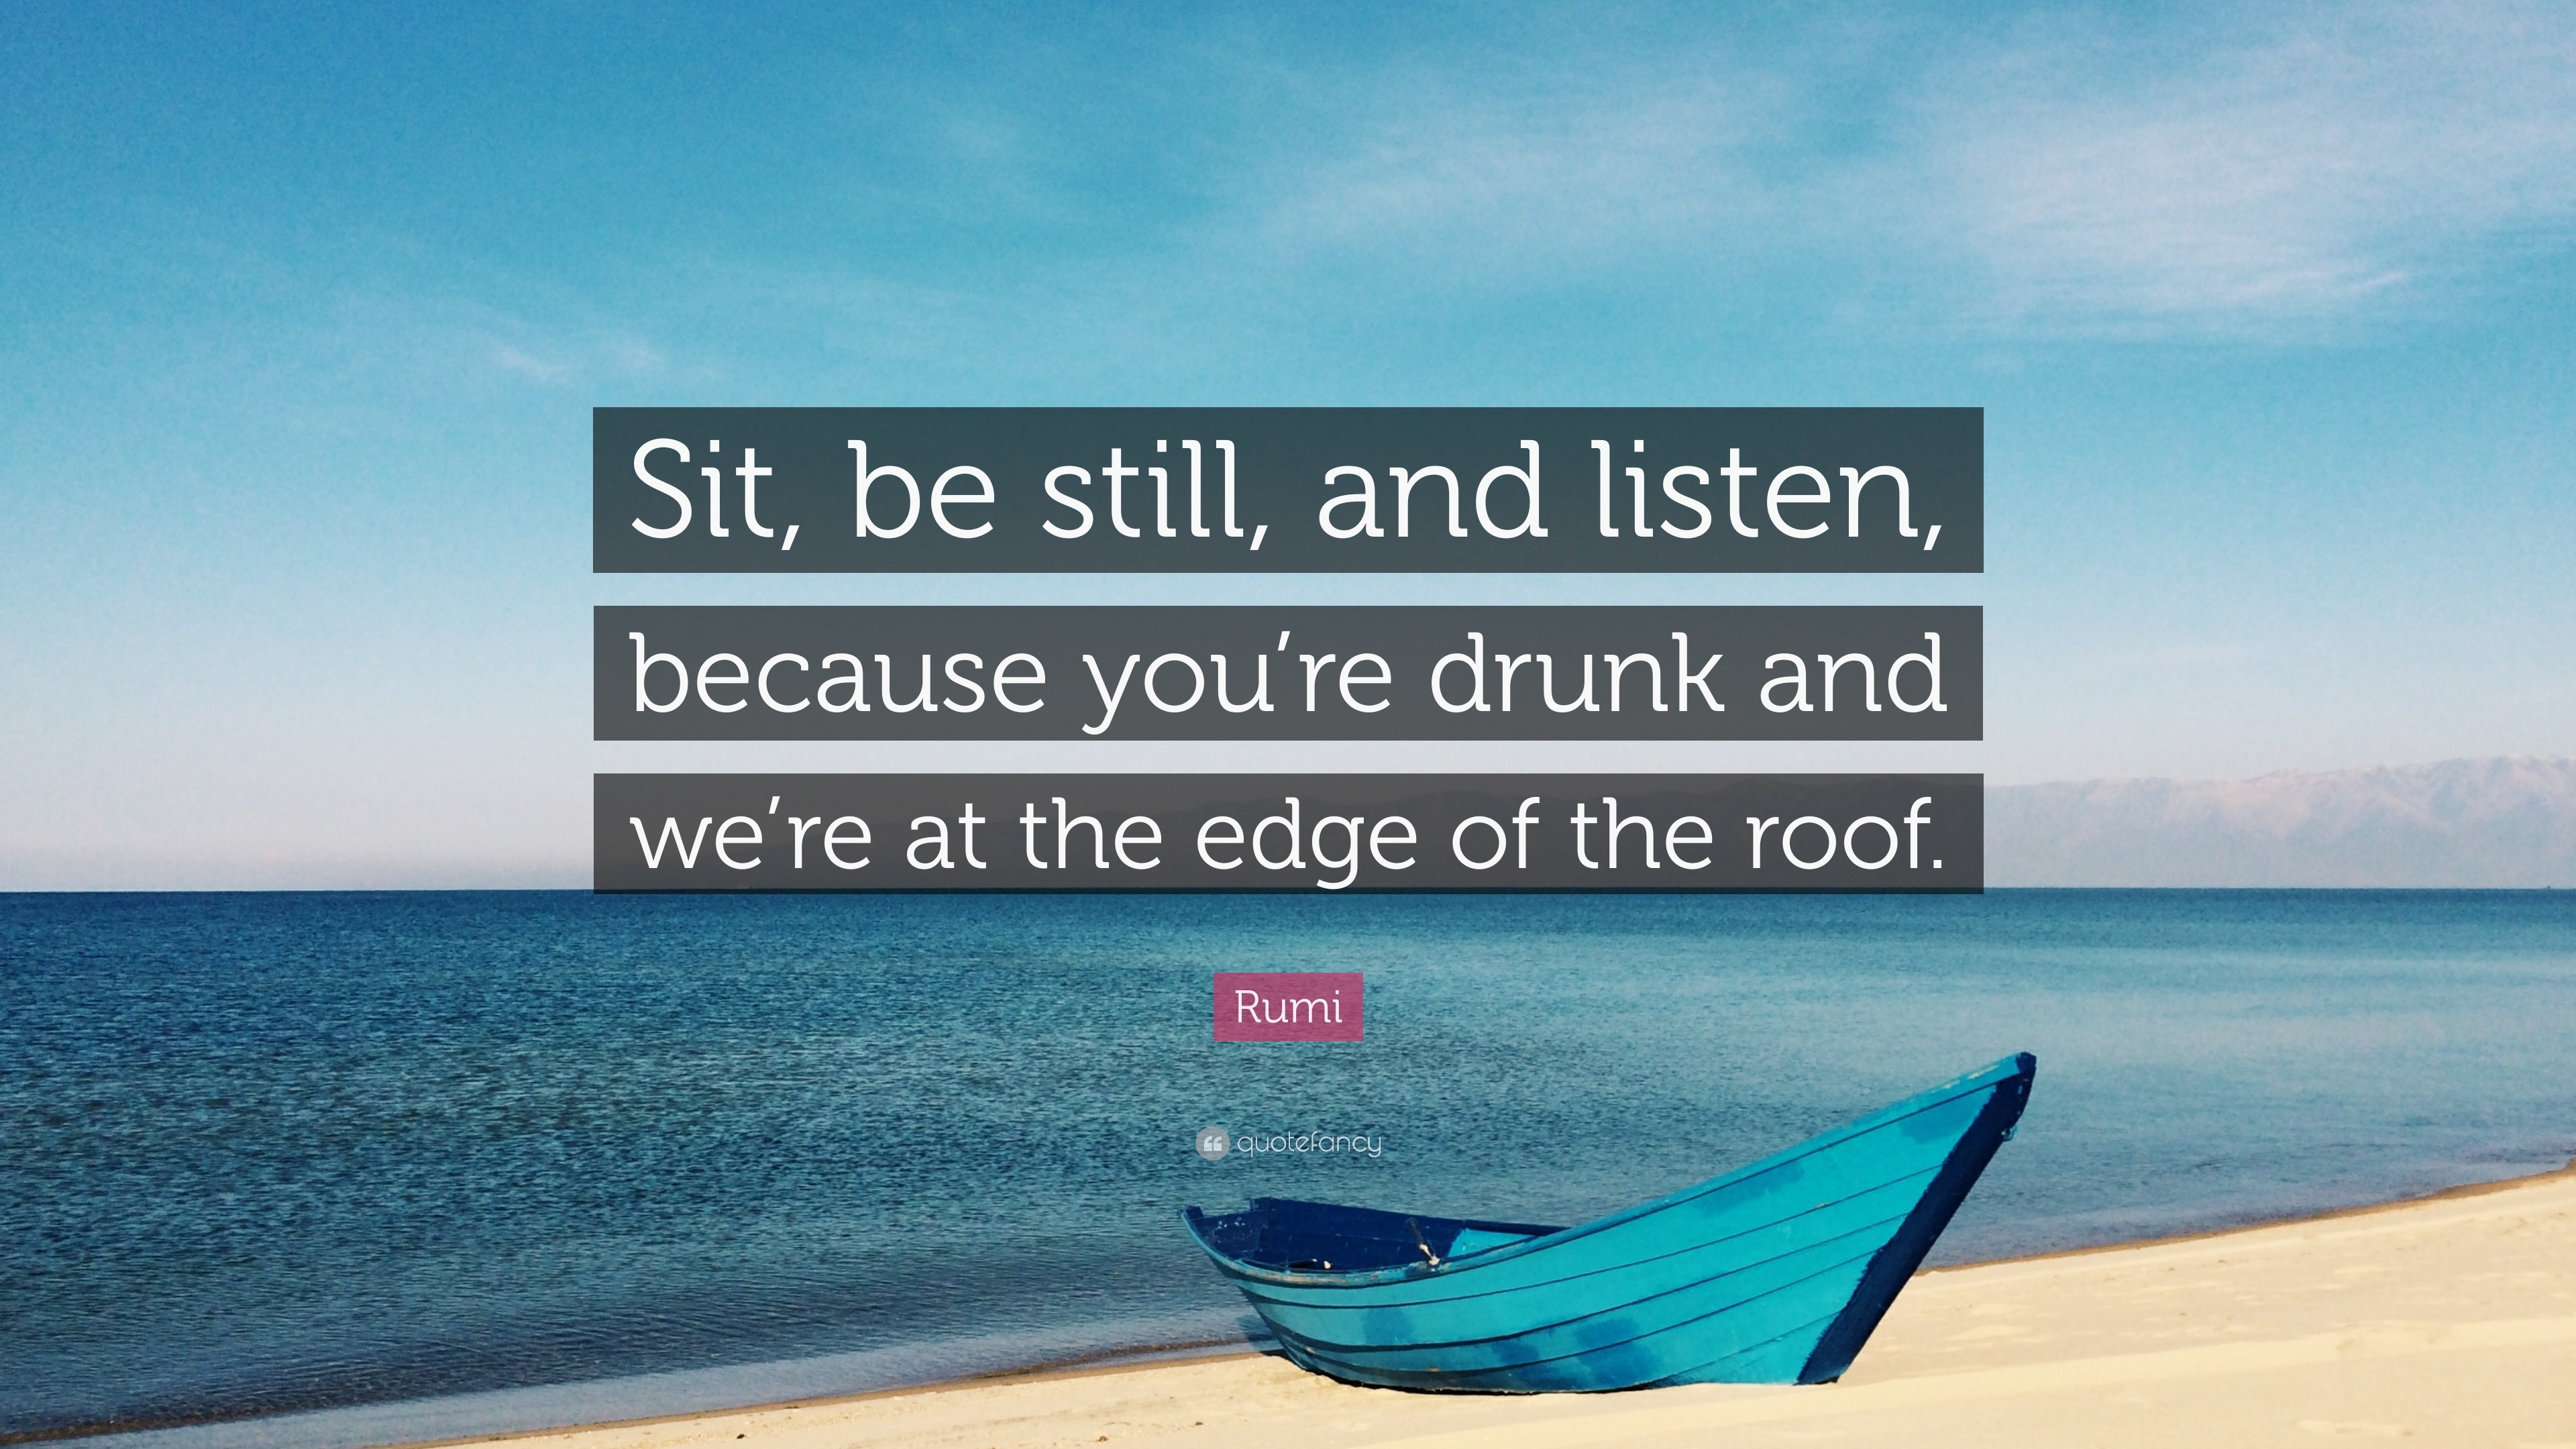 3840x2160 Rumi Quote: “Sit, be still, and listen, because you're